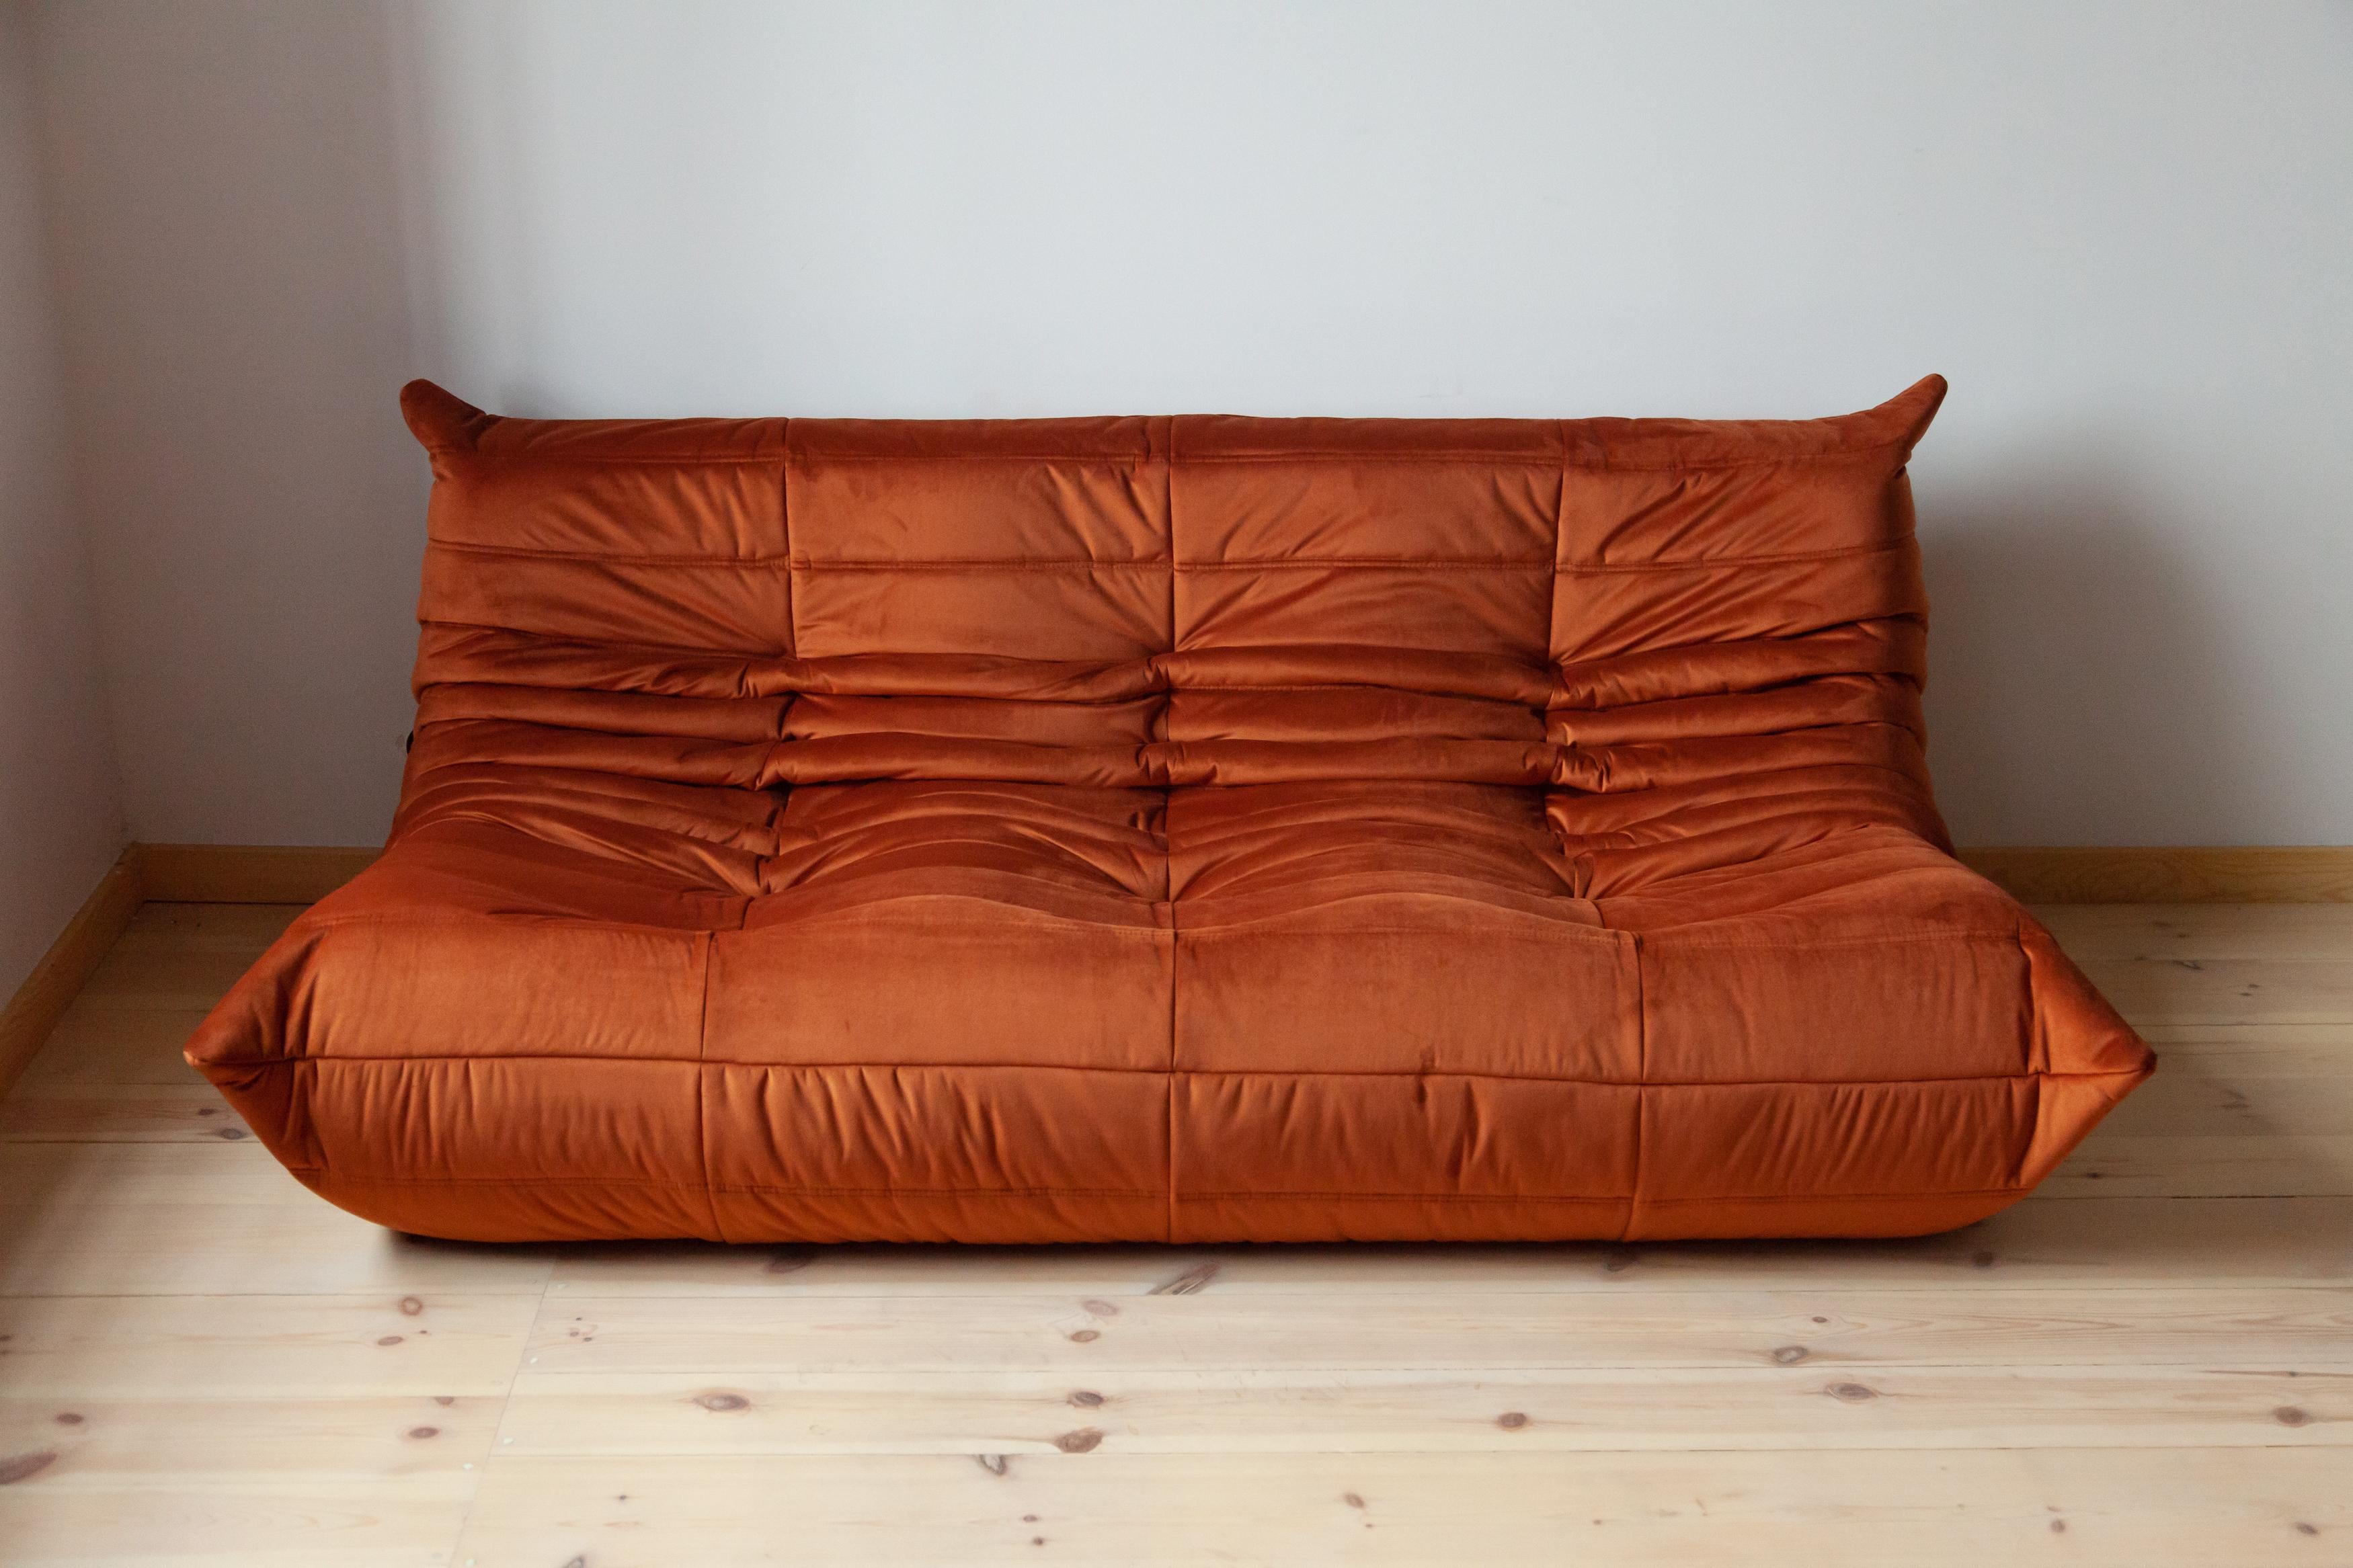 This Togo three-seat sofa was designed by Michel Ducaroy in 1973 and was manufactured by Ligne Roset in France. It has been reupholstered in new amber velvet (70 x 174 x 102 cm). It has the original Ligne Roset logo and genuine Ligne Roset bottom.